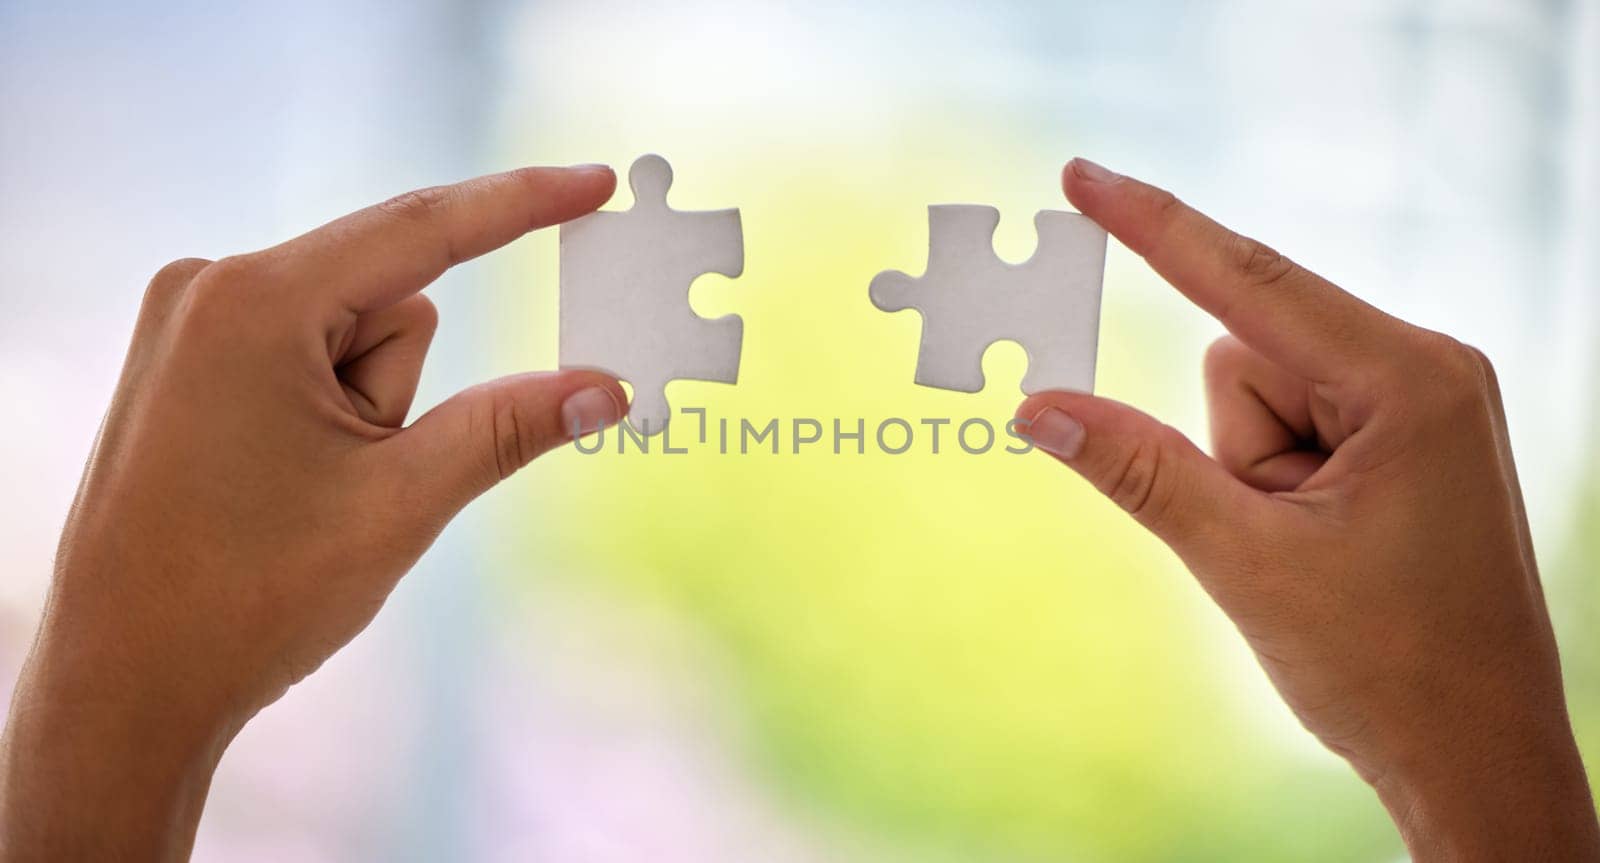 Hands, puzzle and office for business solution with connection, synergy or integration at company. Person, toys and creativity for problem solving, strategy or link with ideas for vision in workplace.